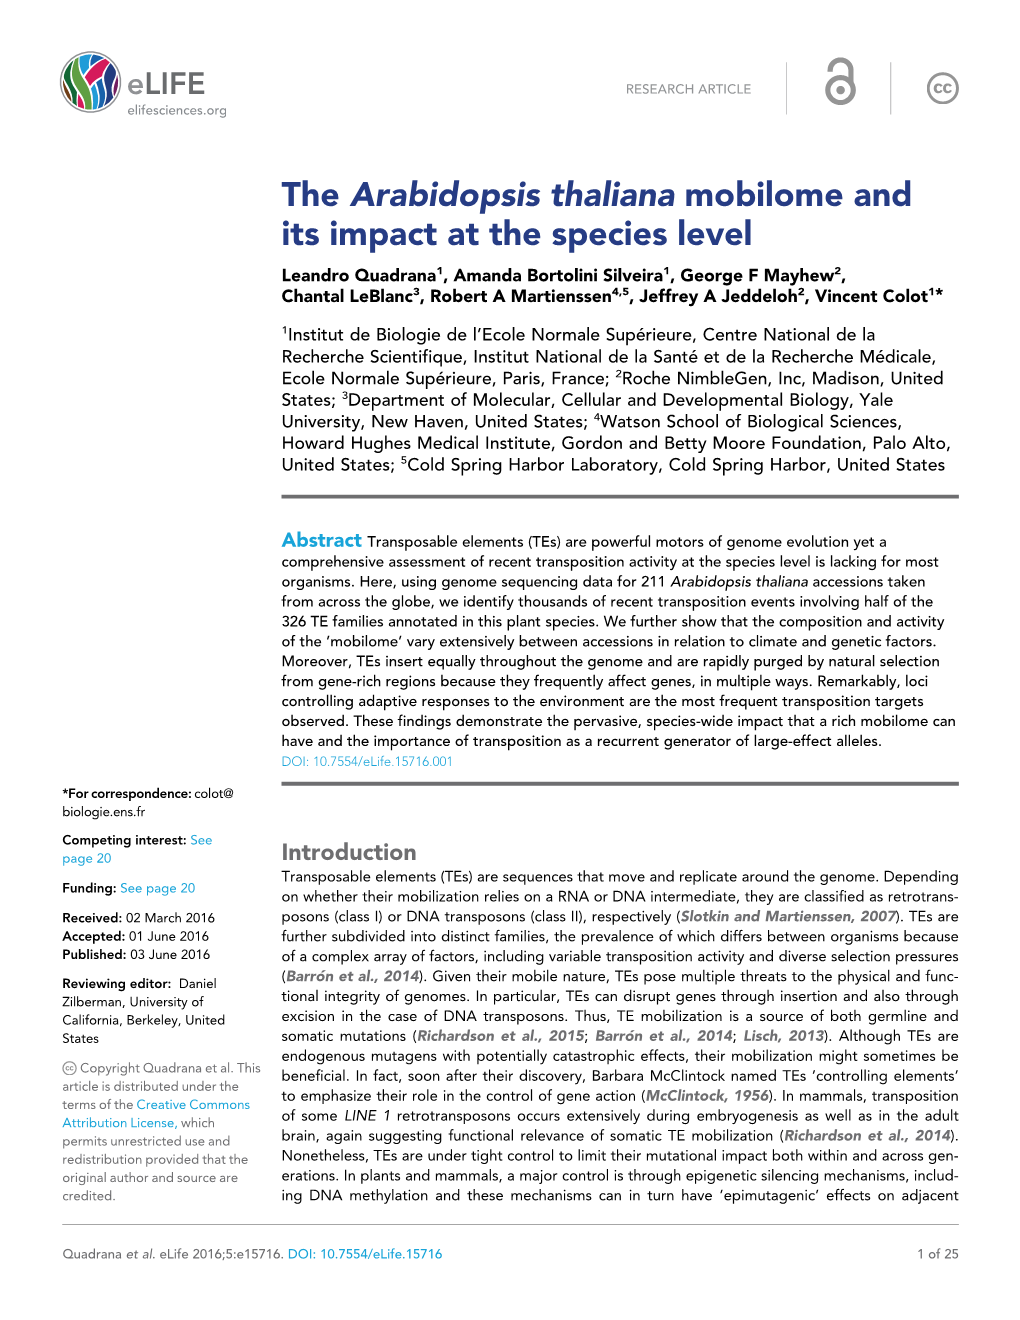 The Arabidopsis Thaliana Mobilome and Its Impact at the Species Level